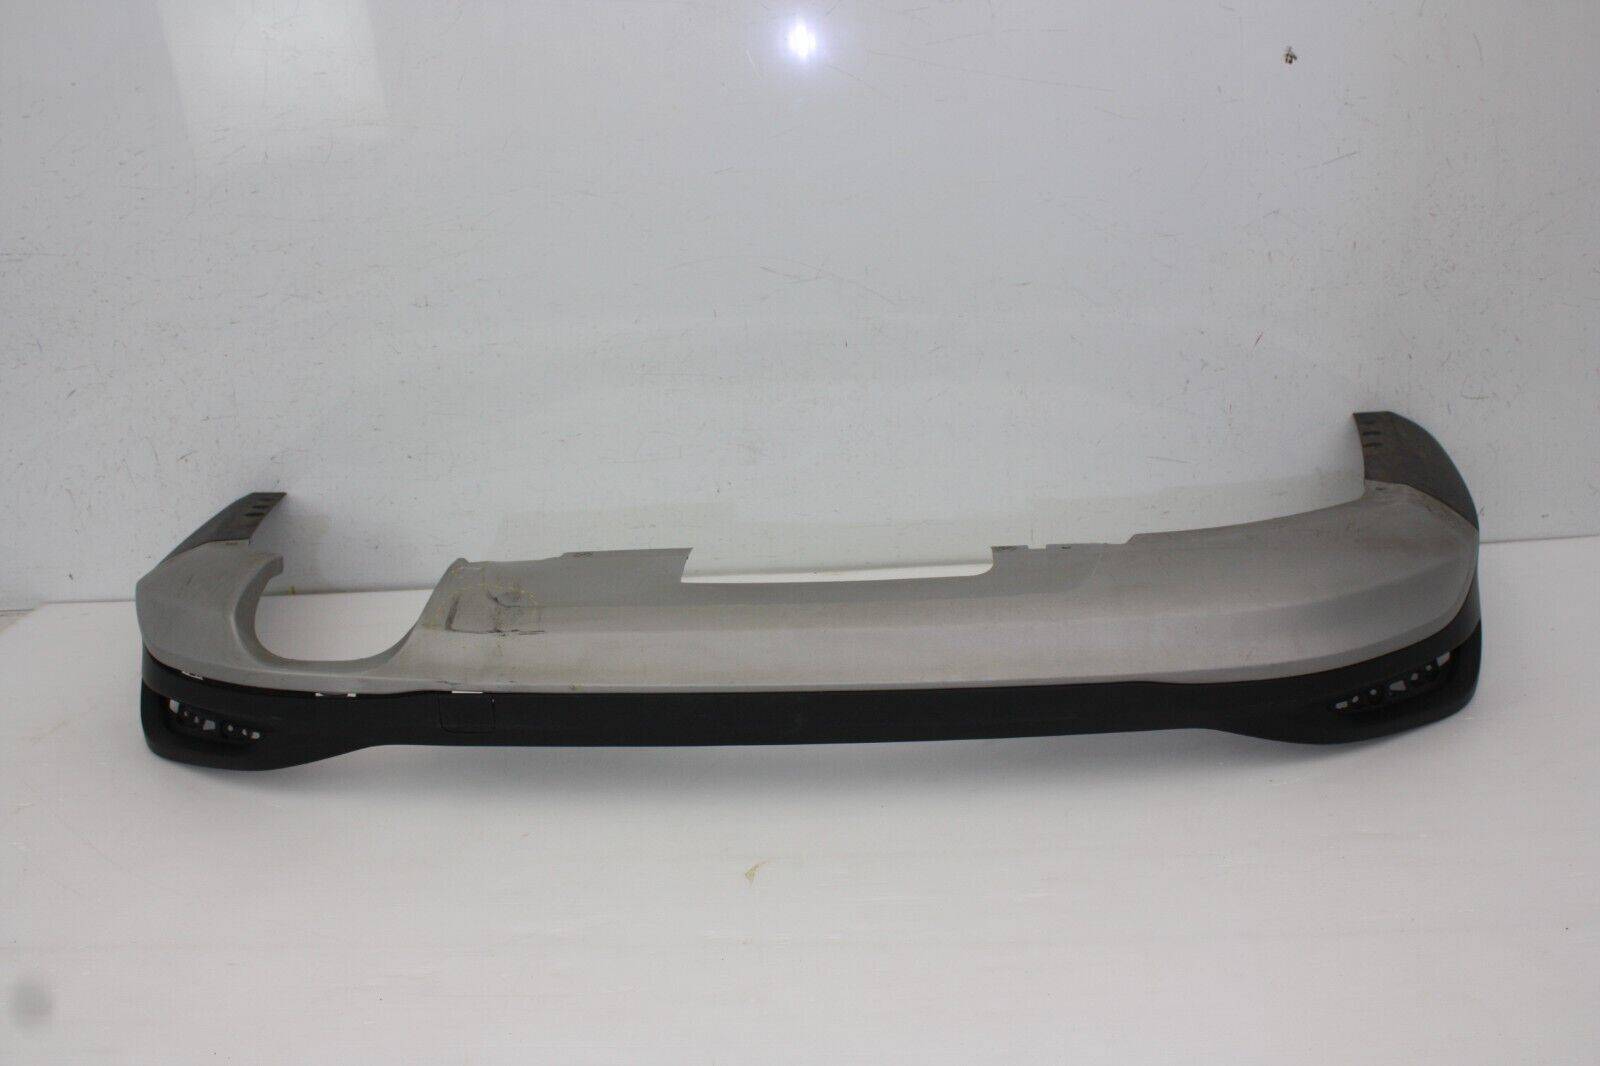 Ford Focus Rear Bumper Lower Section JX7B 17F954 J Genuine SEE PICS 175467150053